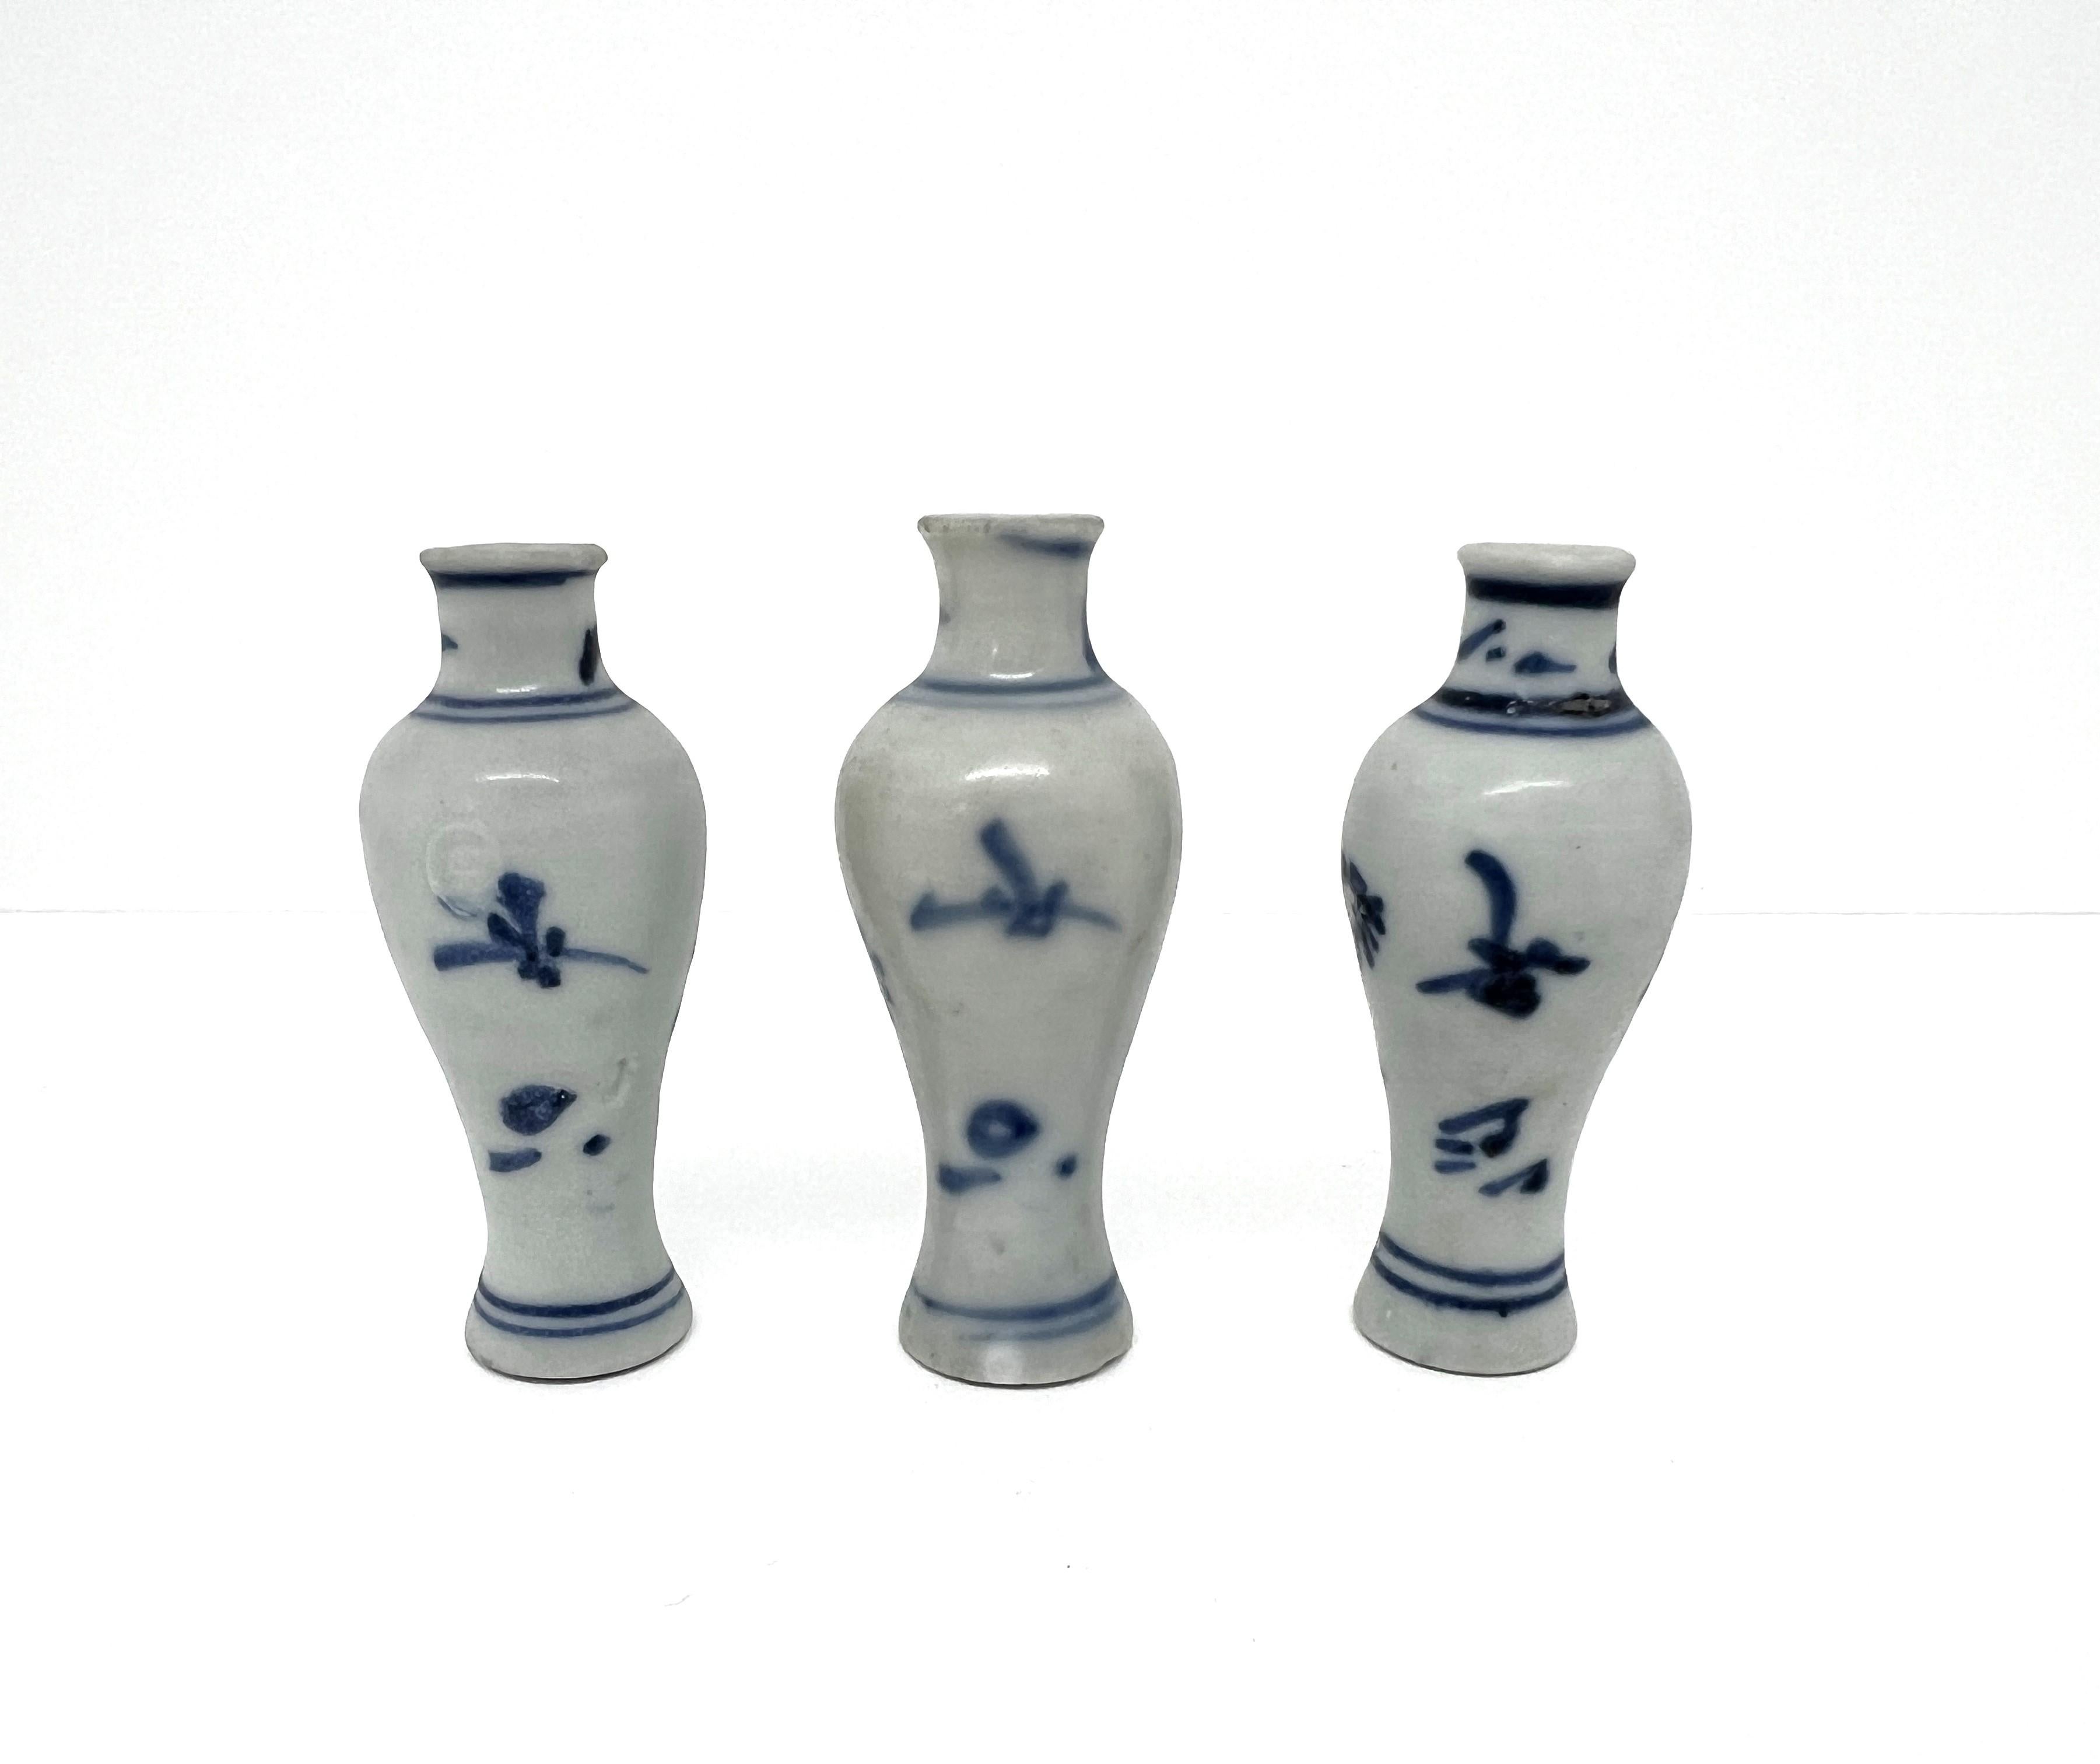 * Set Item(3 vases)

During Yongzheng era, such miniatures were appreciated for their craftsmanship and aesthetic value. They were also often used in scholars' studios as part of the 'wenfang', or study room ensemble, which included various objects